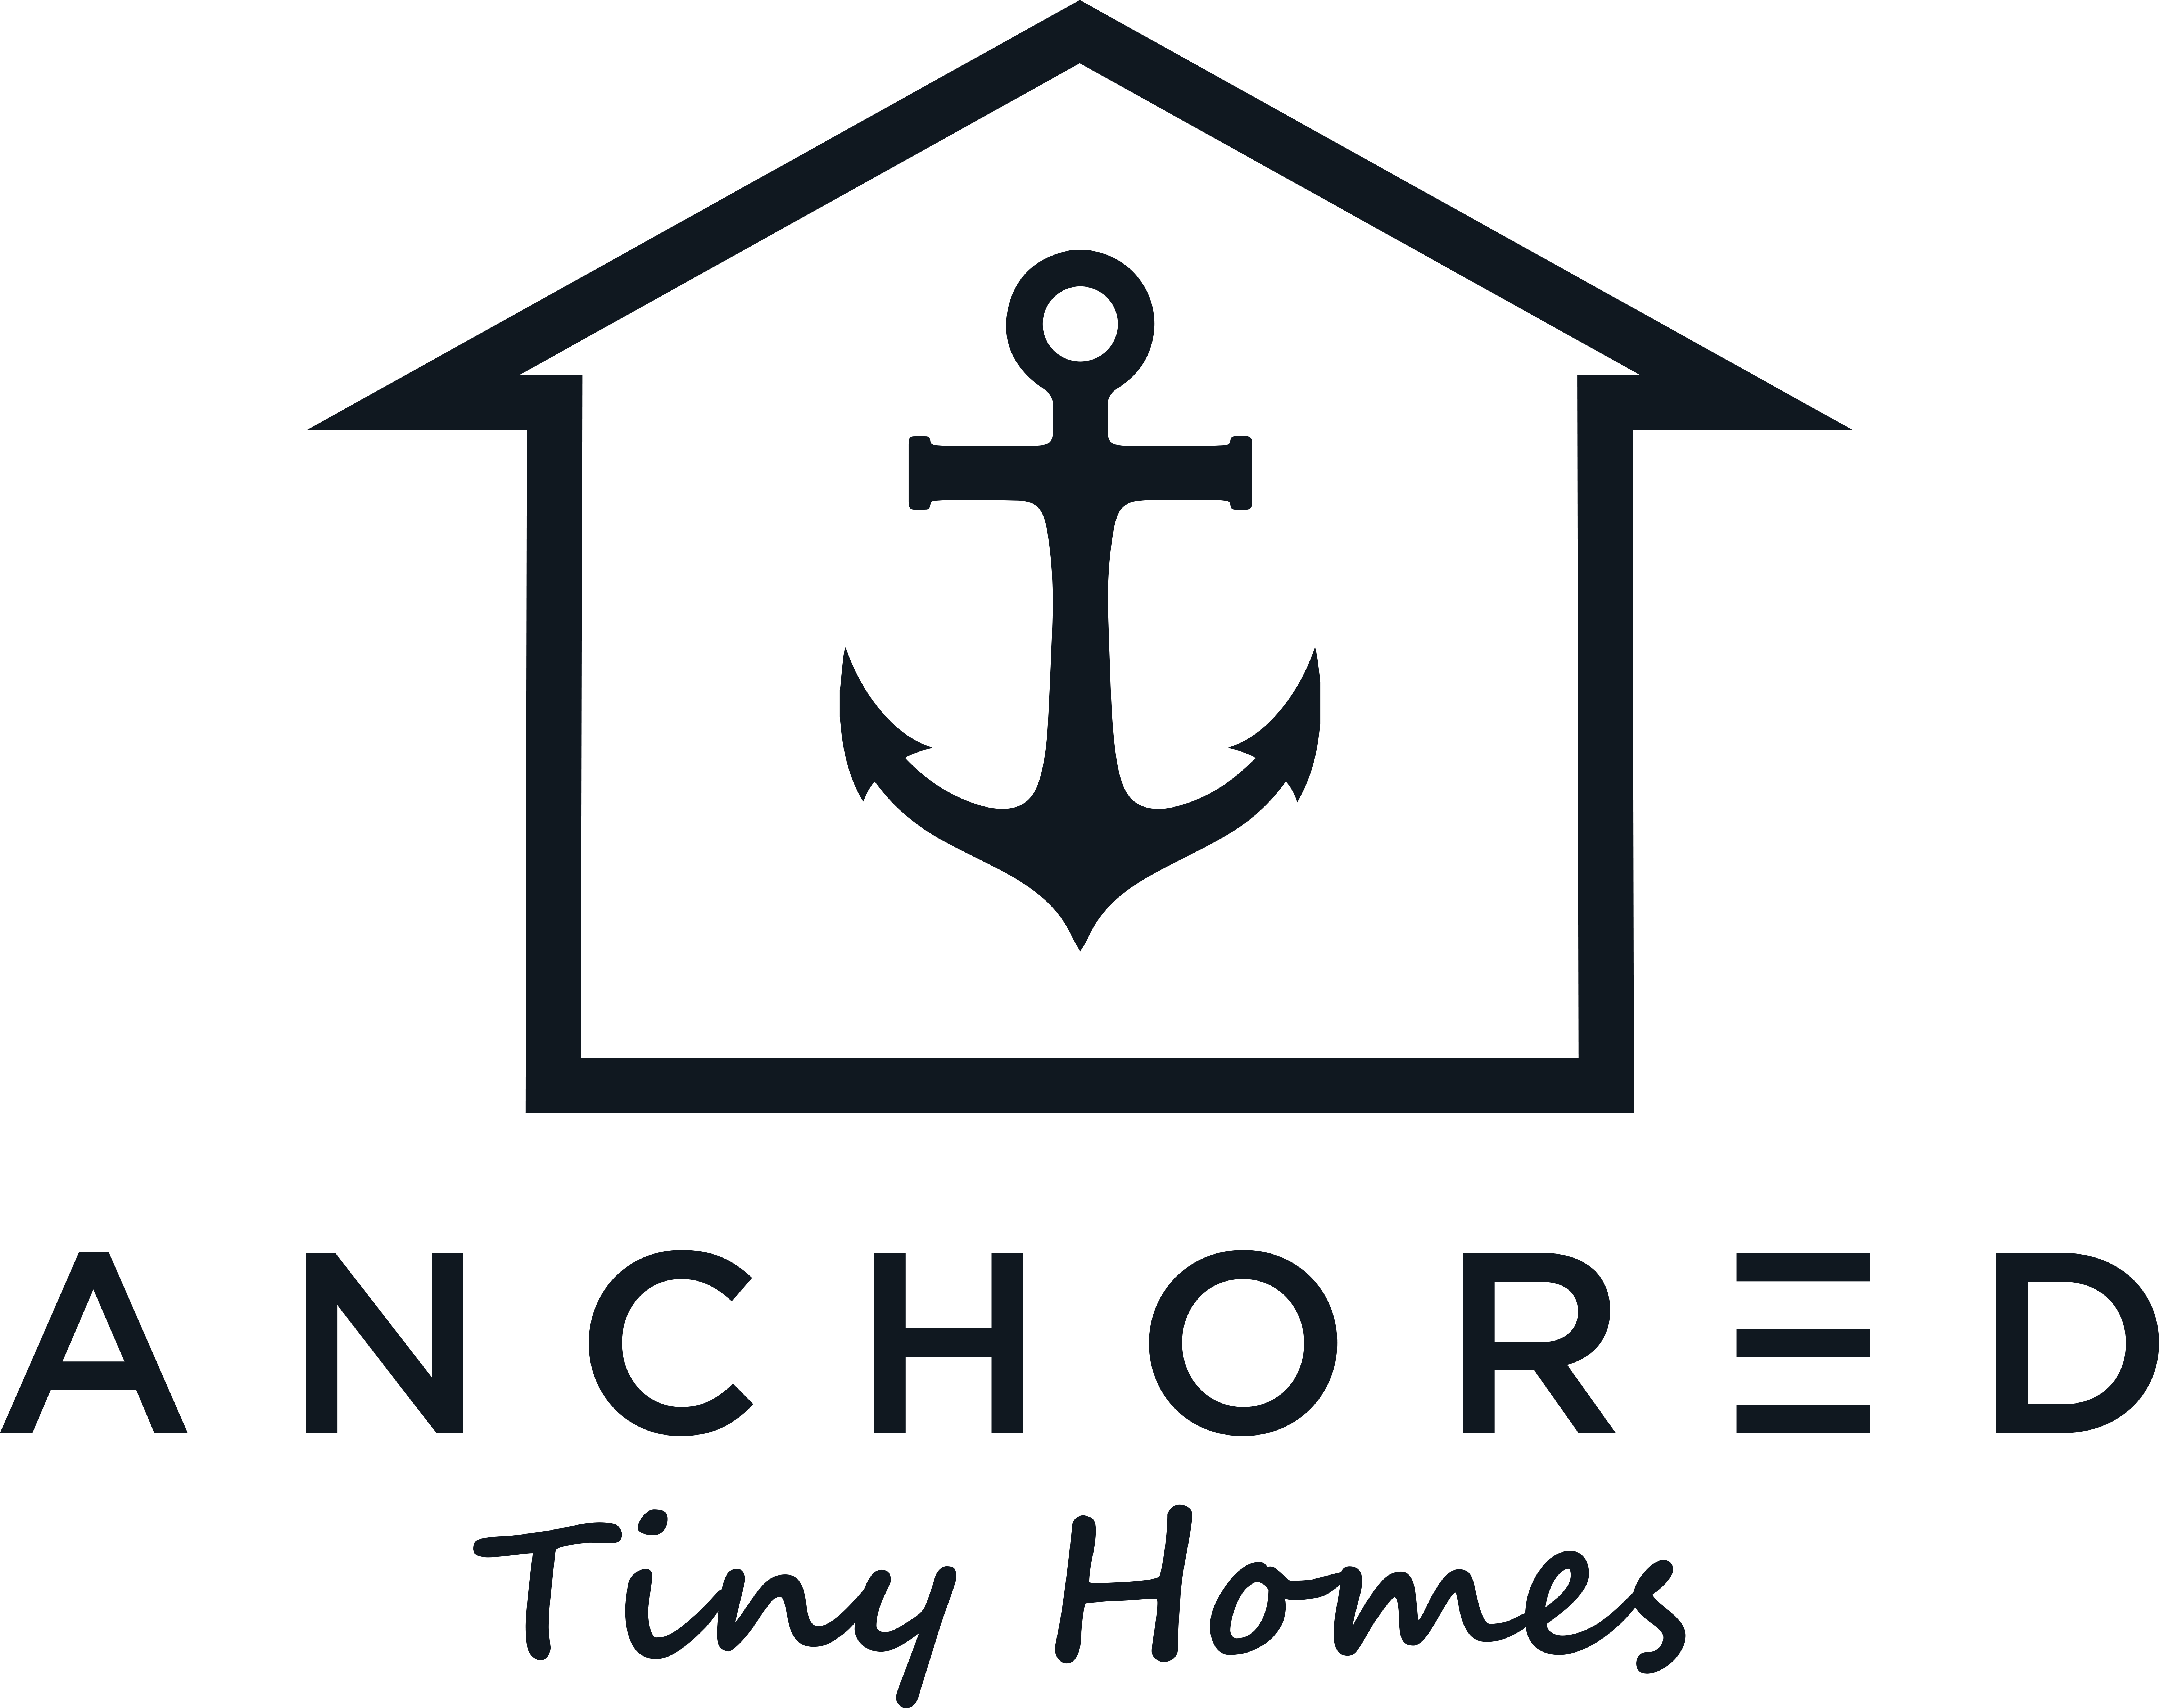 Anchored Tiny Homes Highlight How Accessory Dwelling Units Can Benefit Homeowners